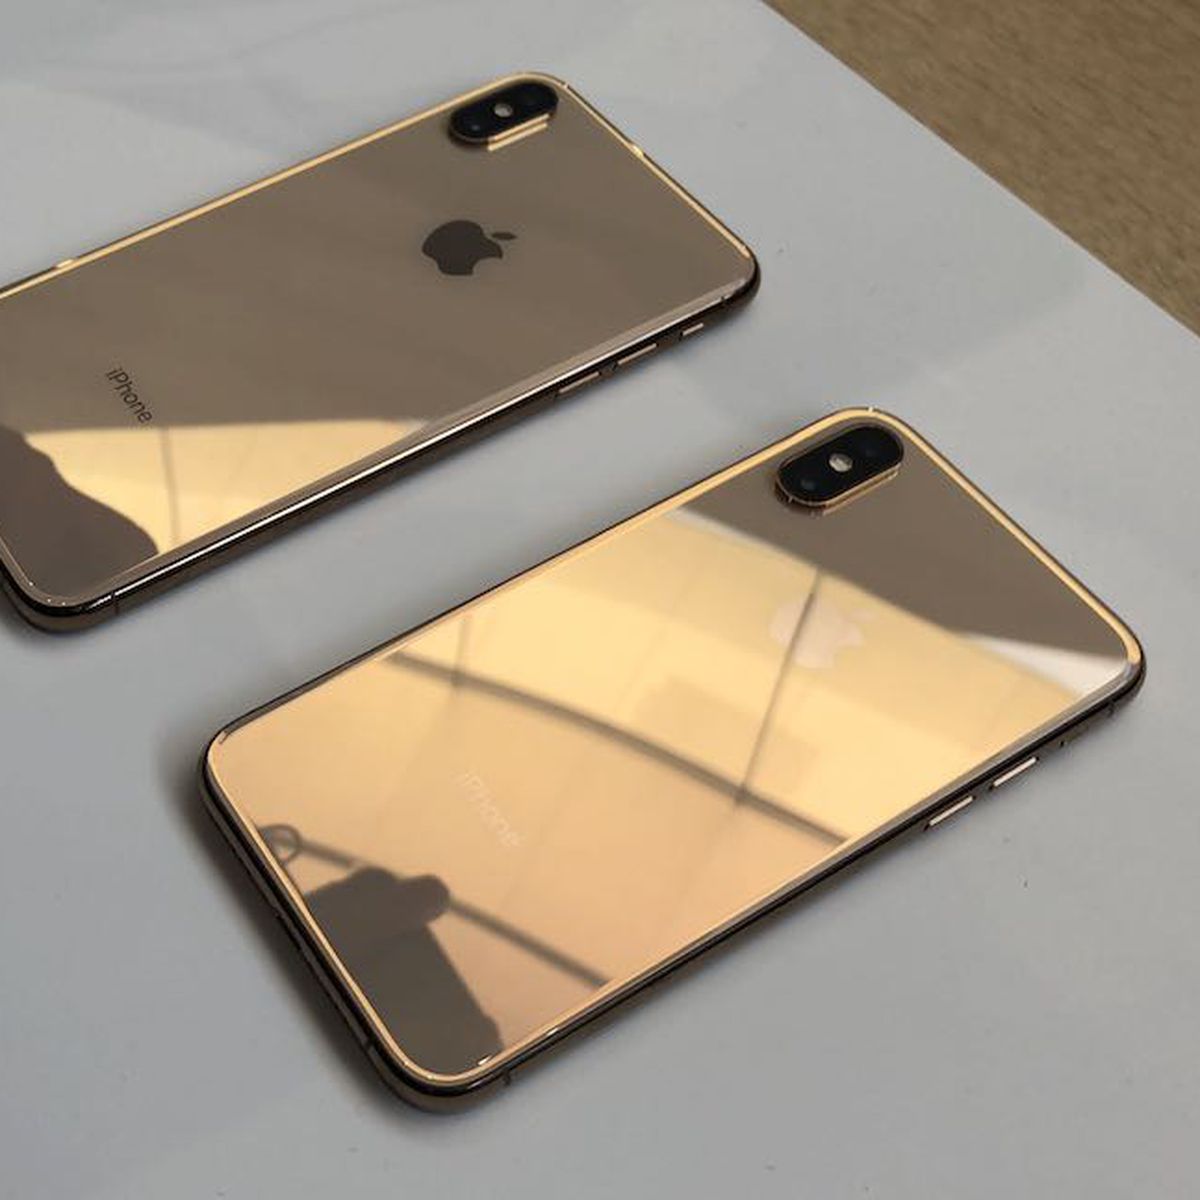 Iphone Xs Max Is Apple S Most Expensive Iphone Model To Date At 1 449 For 512gb Macrumors